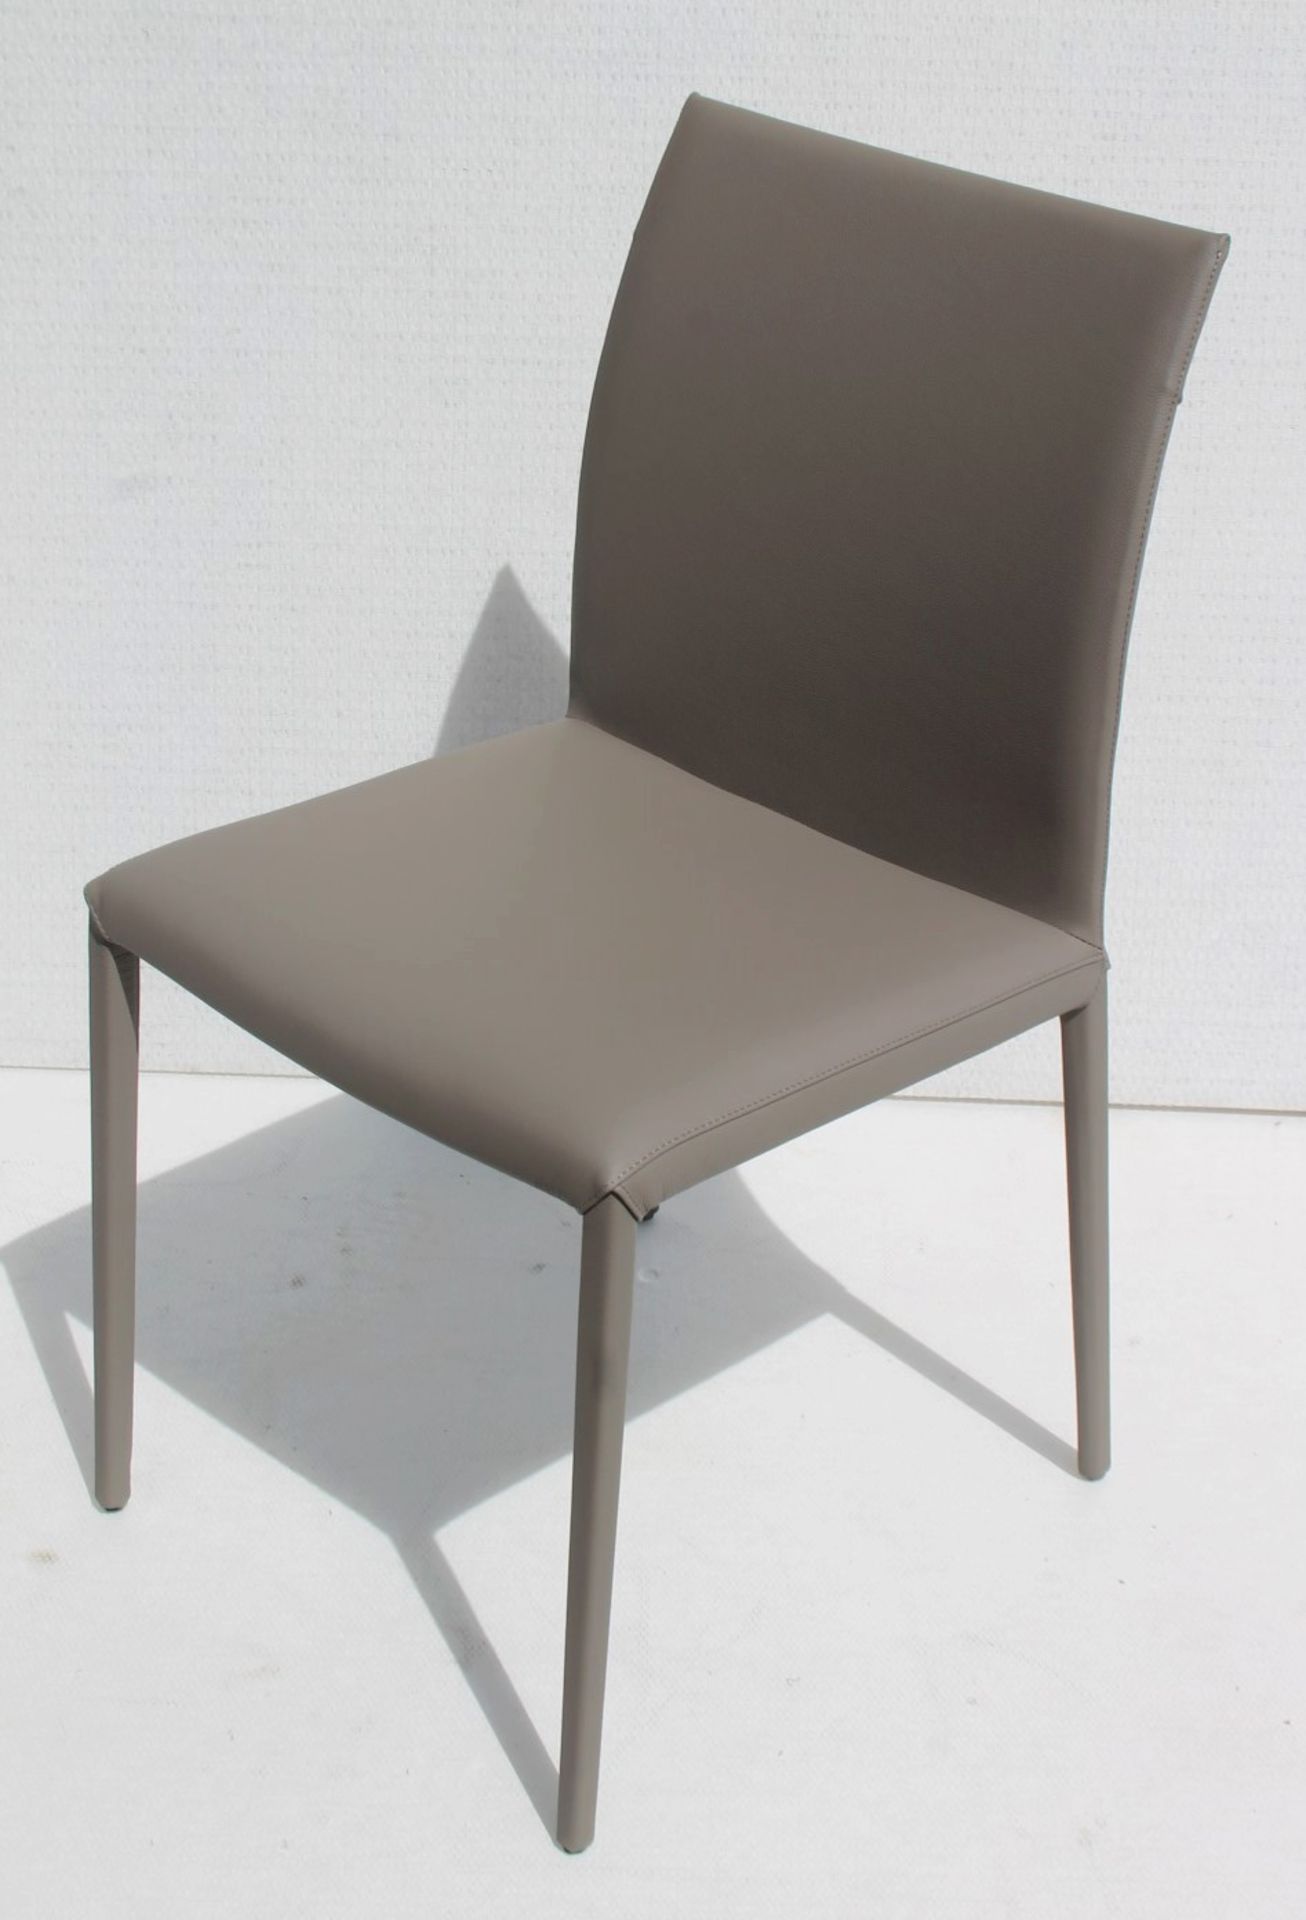 4 x CATELLAN 'Norma' Designer Italian Dining Chairs In Soft Grey Leather - Original RRP £3,840 - Image 3 of 7